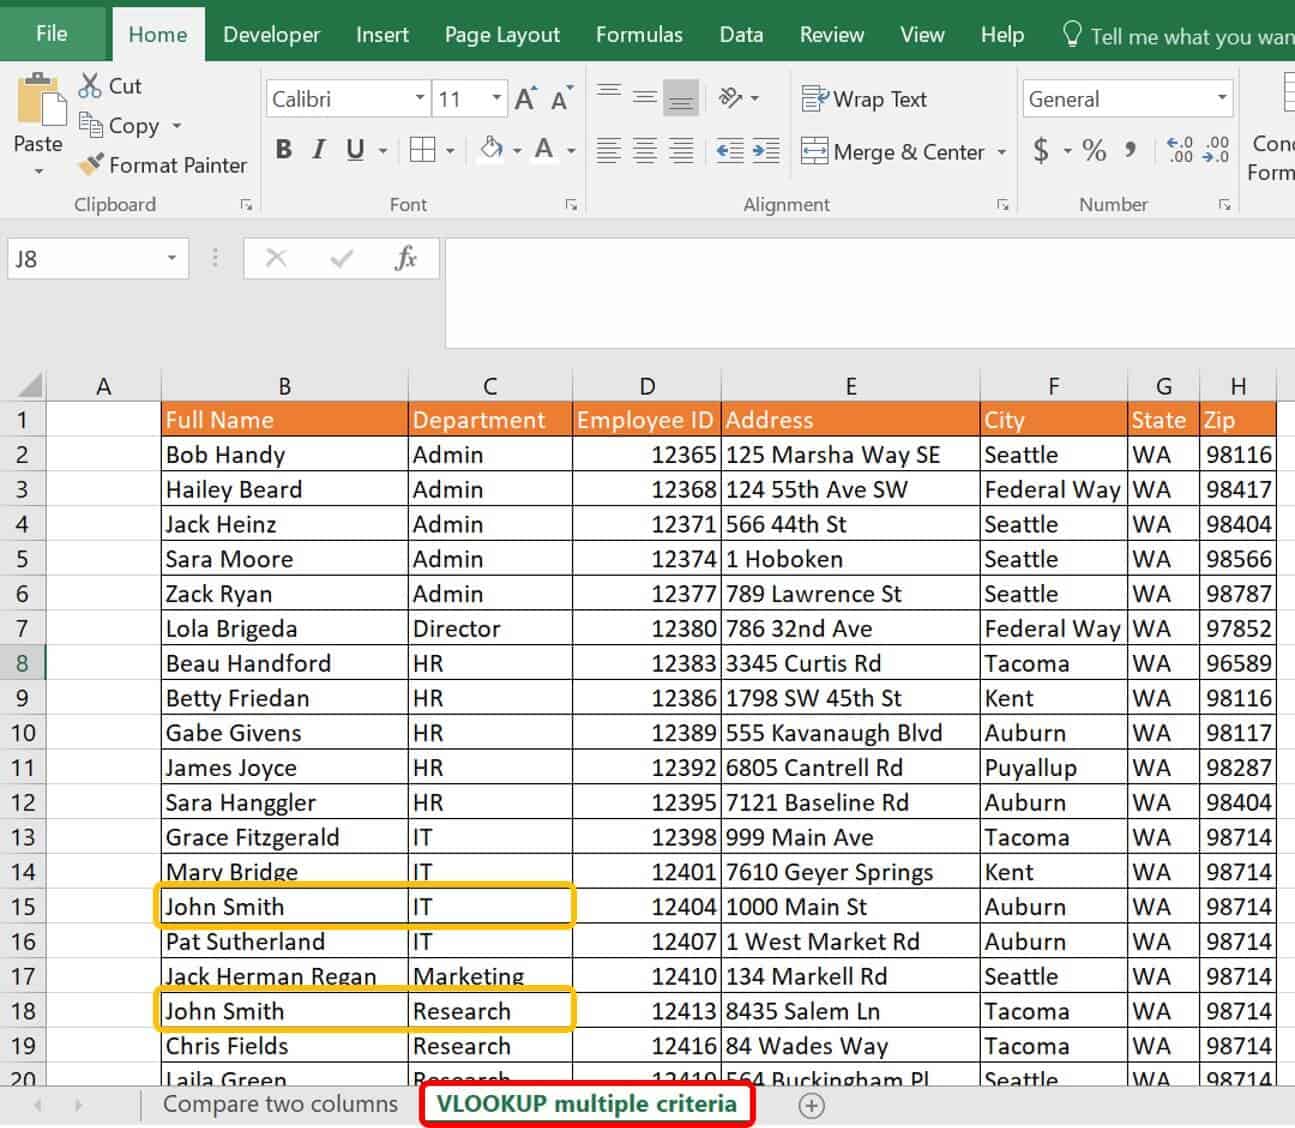 vlookup-with-table-for-retrieving-data-with-multiple-criteria-unlock-your-excel-potential